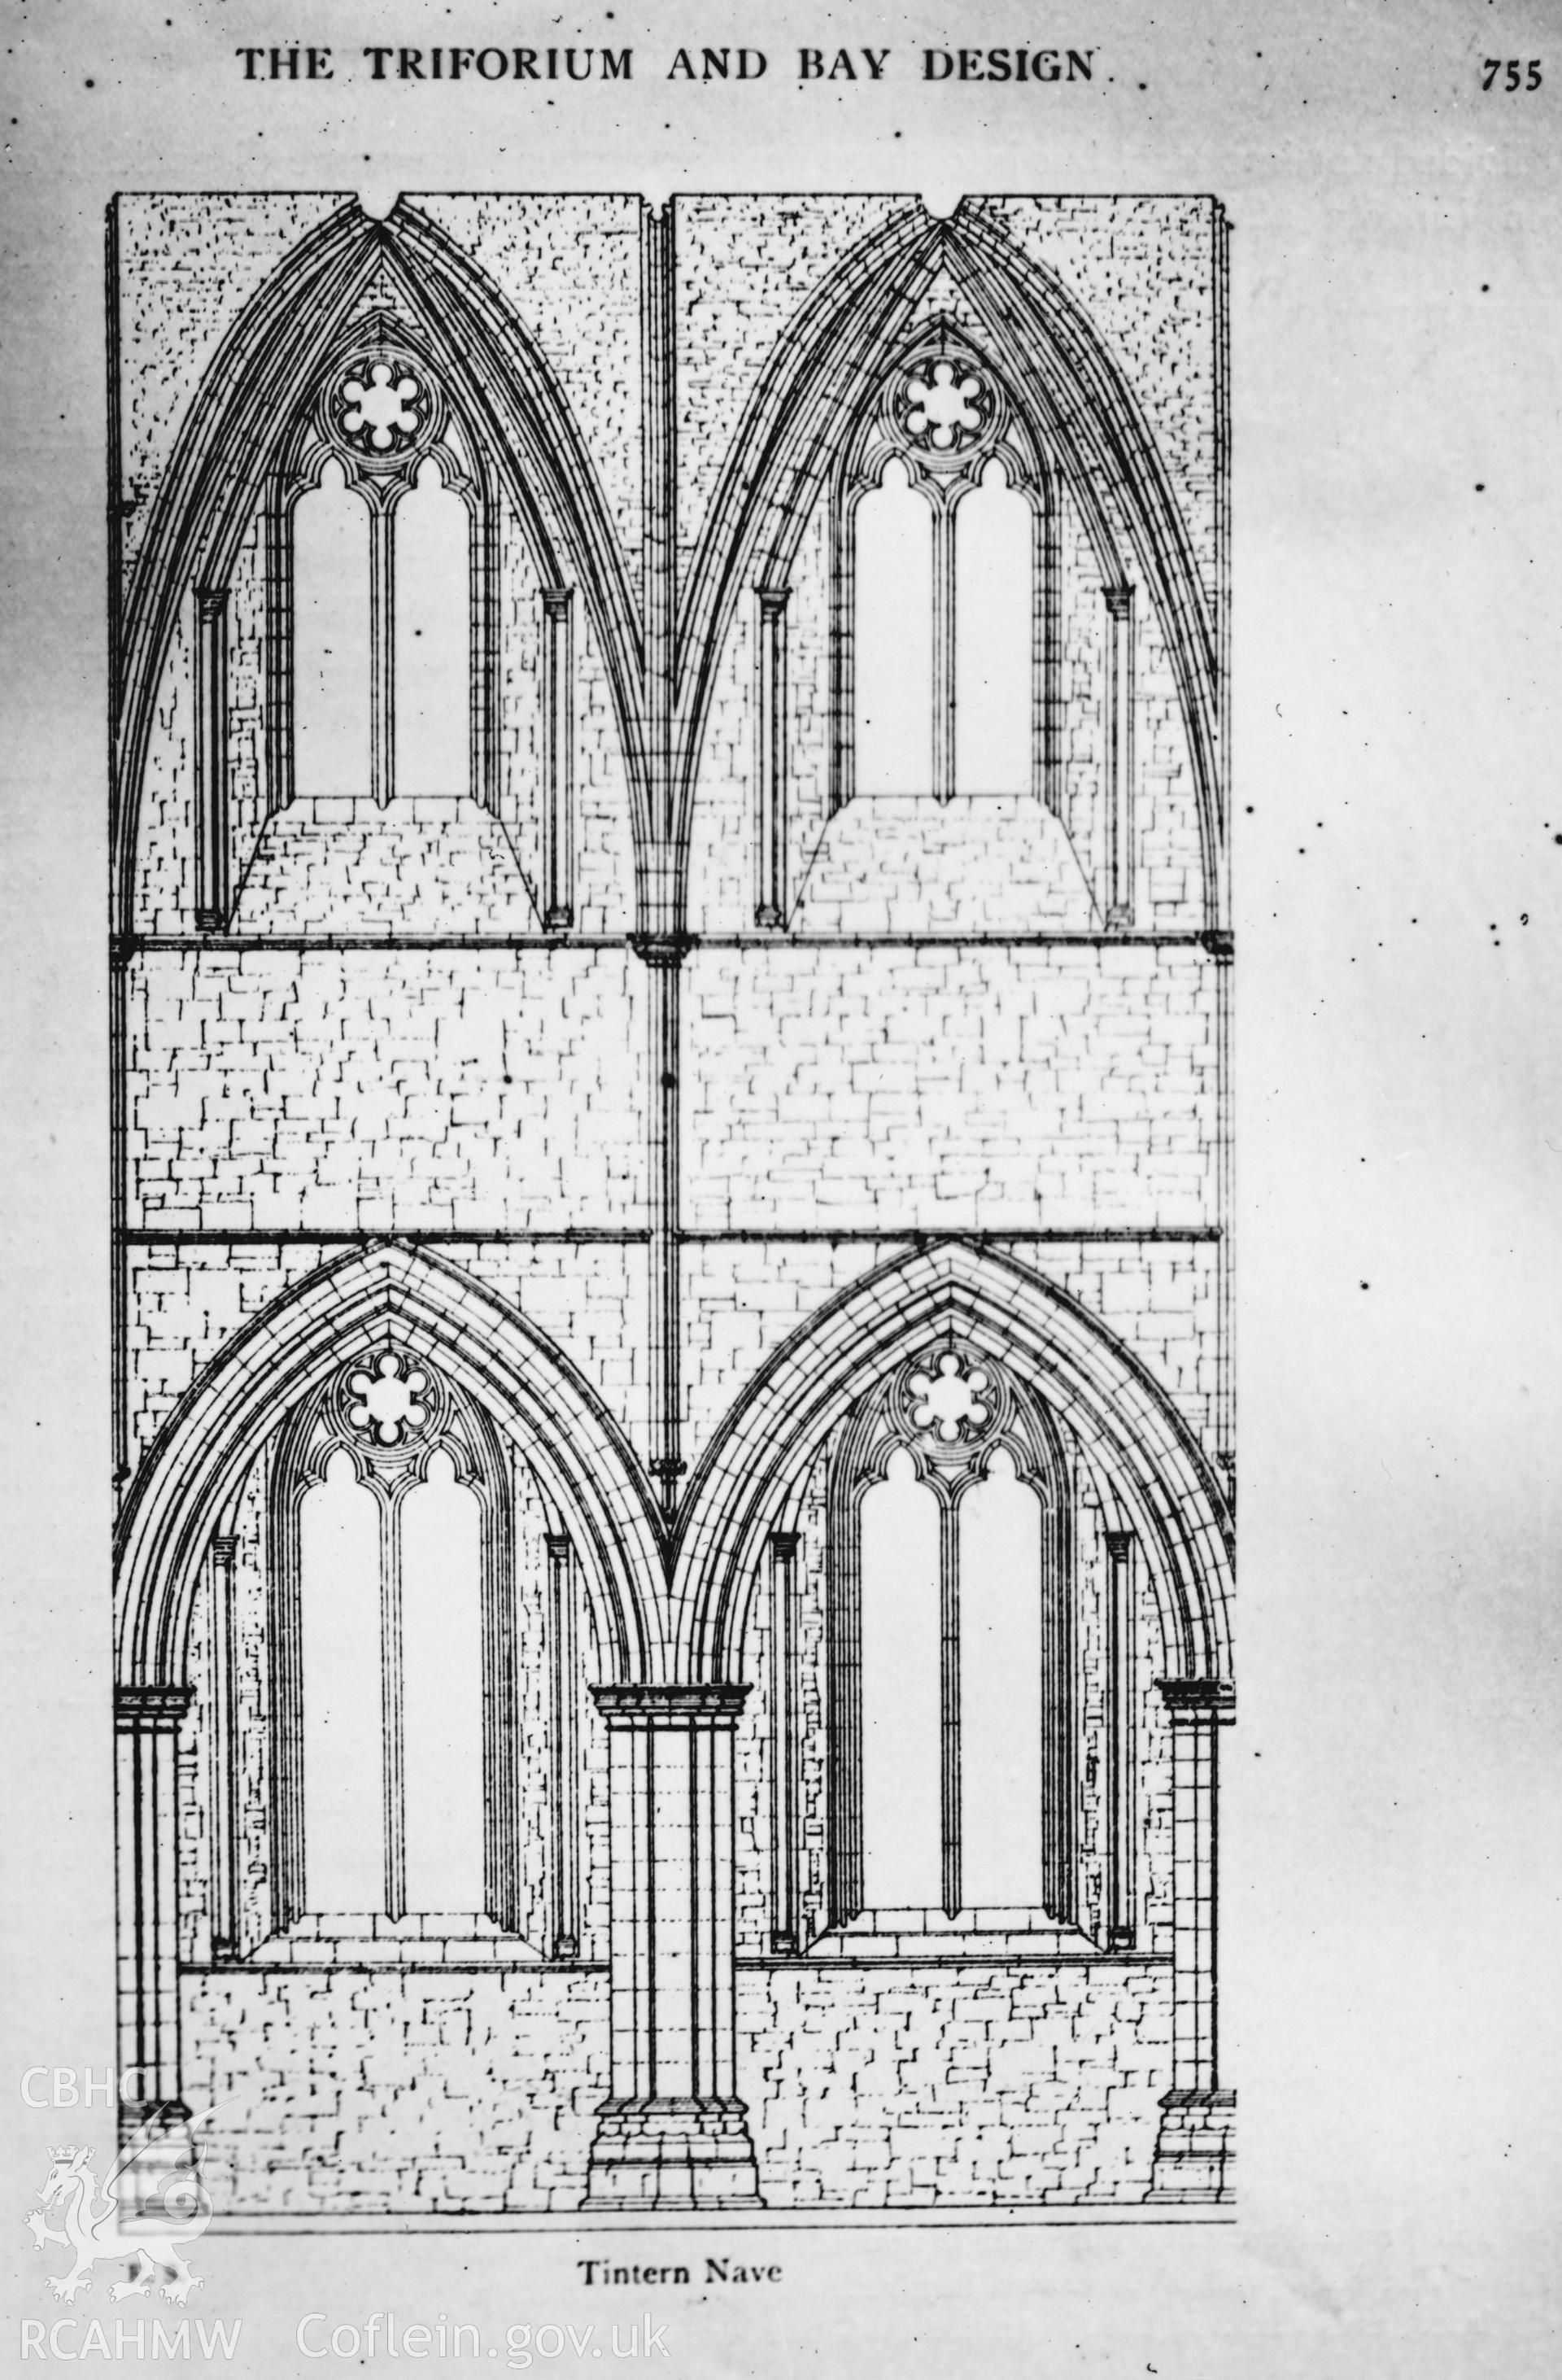 Digital copy of an illustration of the nave window at Tintern Abbey by F H Crossley, 1948